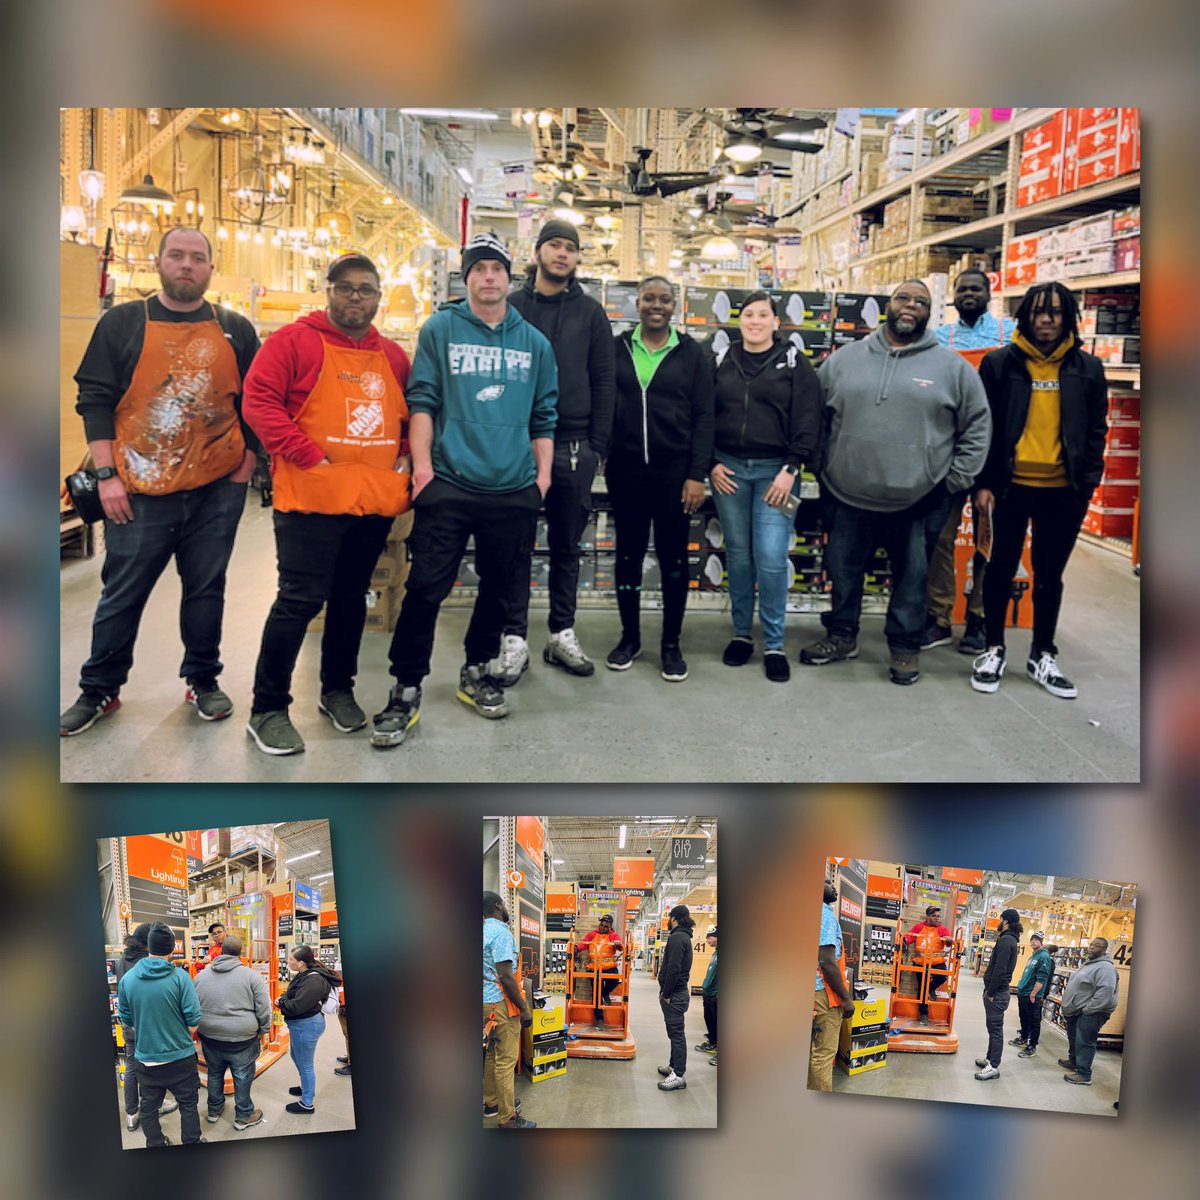 Orientation was a success we are so glad to welcome our new hires and thank you 🙏 to Sean Cxm / Jesus D27 and Alex D24 for spreading the importance of slowing ⚠️ down and working safe 🥽 always #SafetyTakesEveryone